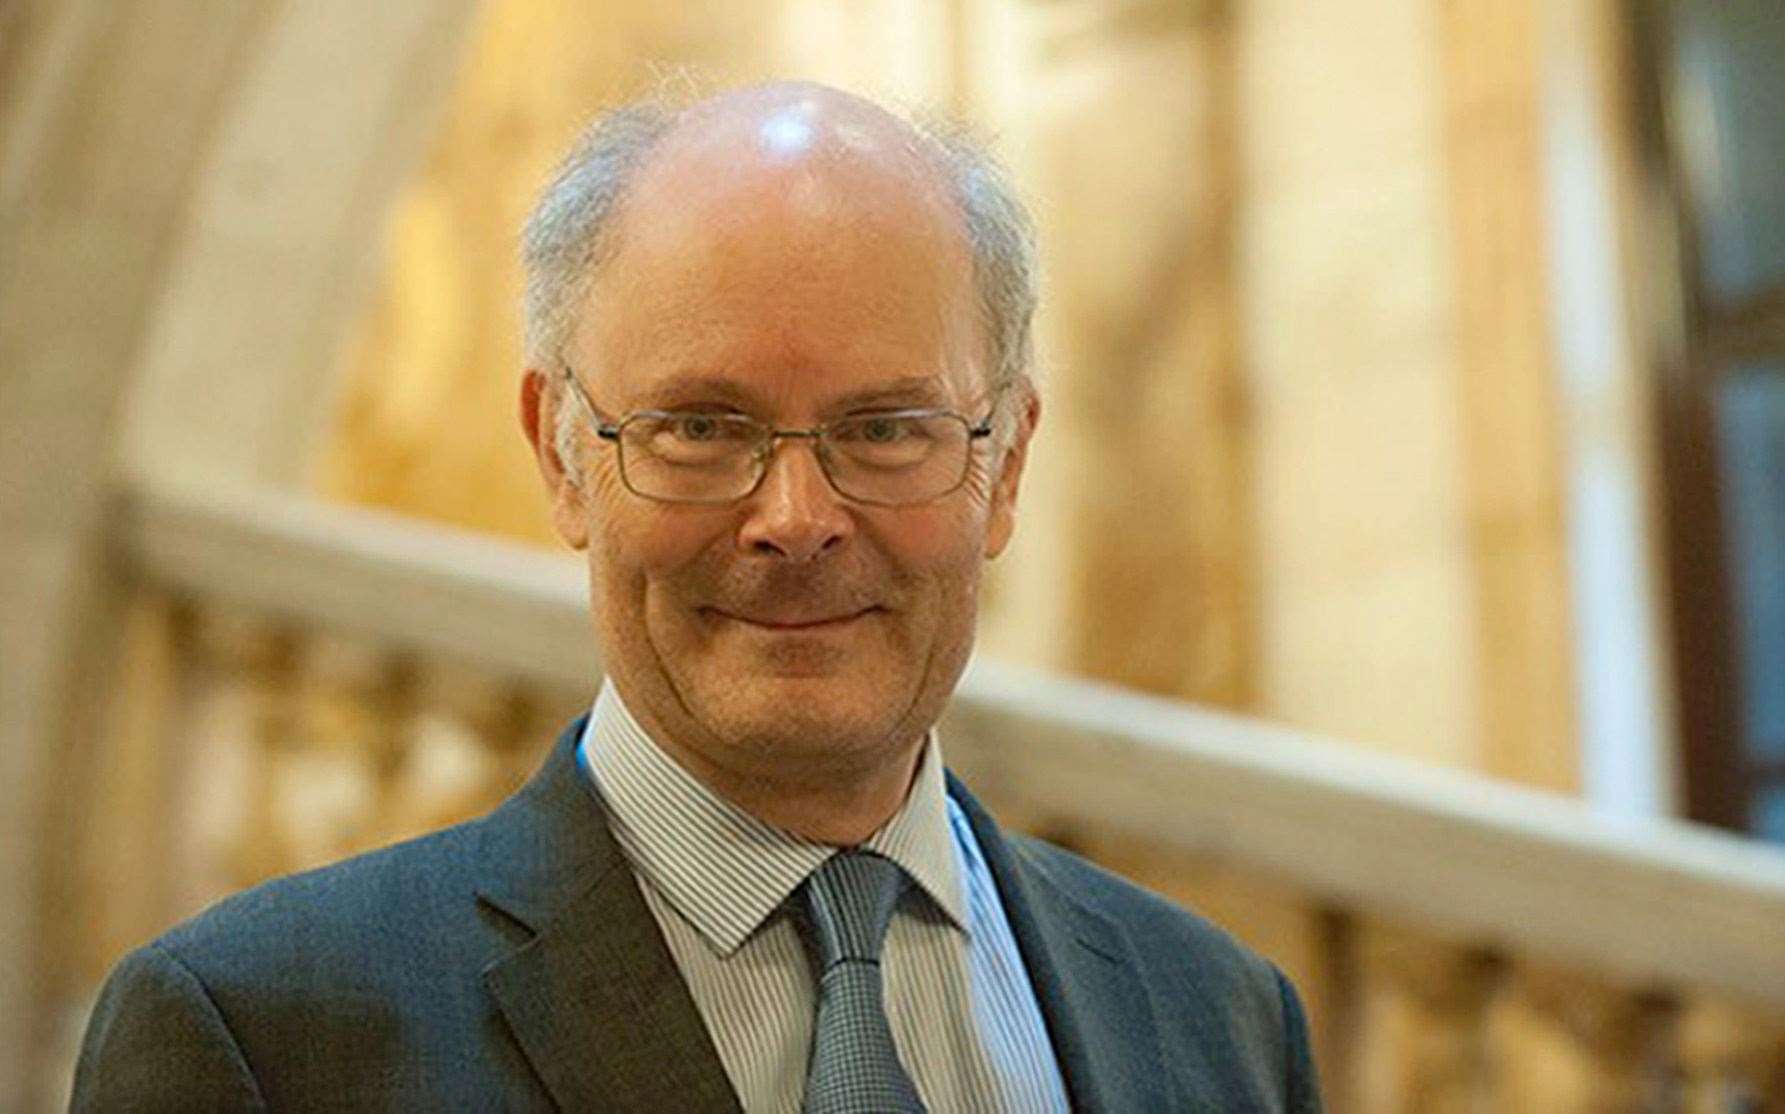 Elections expert Professor Sir John Curtice said the SNP is now ‘only just’ ahead of Labour in opinion polls (Strathclyde University/PA)